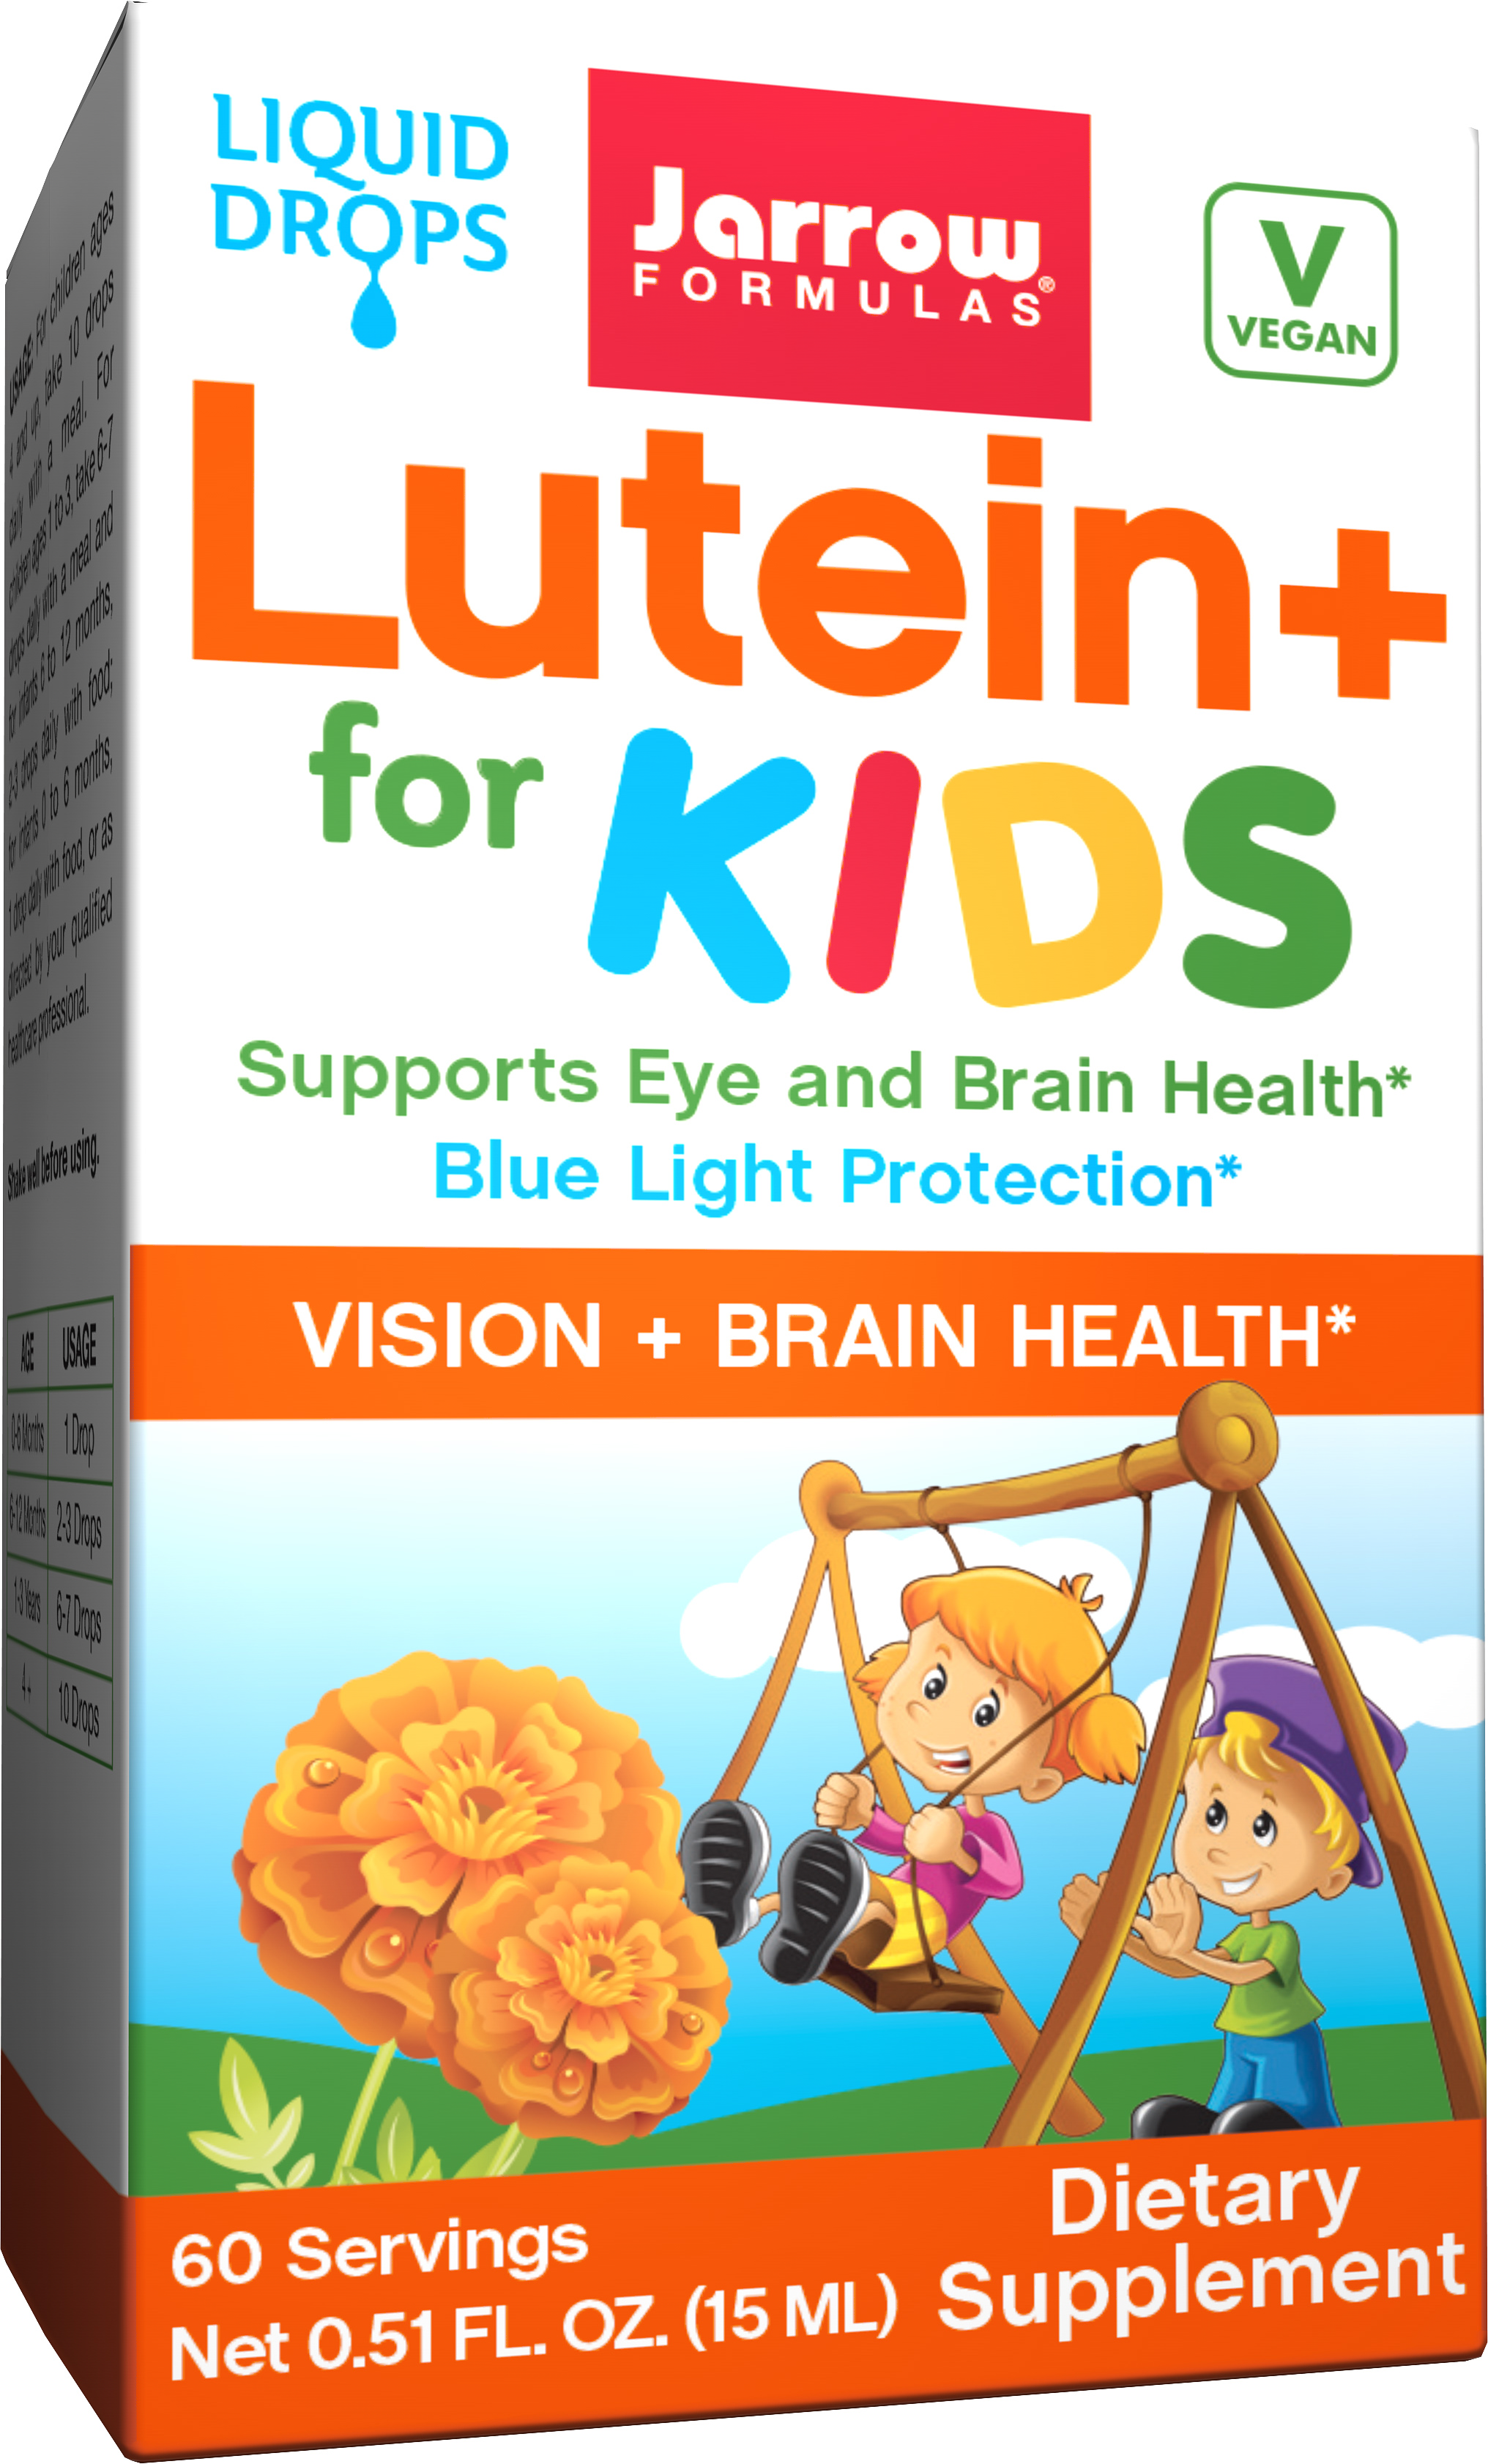 Jarrow Formulas Lutein + for Kids, Supports Eye and Brain Health* Blue Light Protection*, 15 ML - image 1 of 2